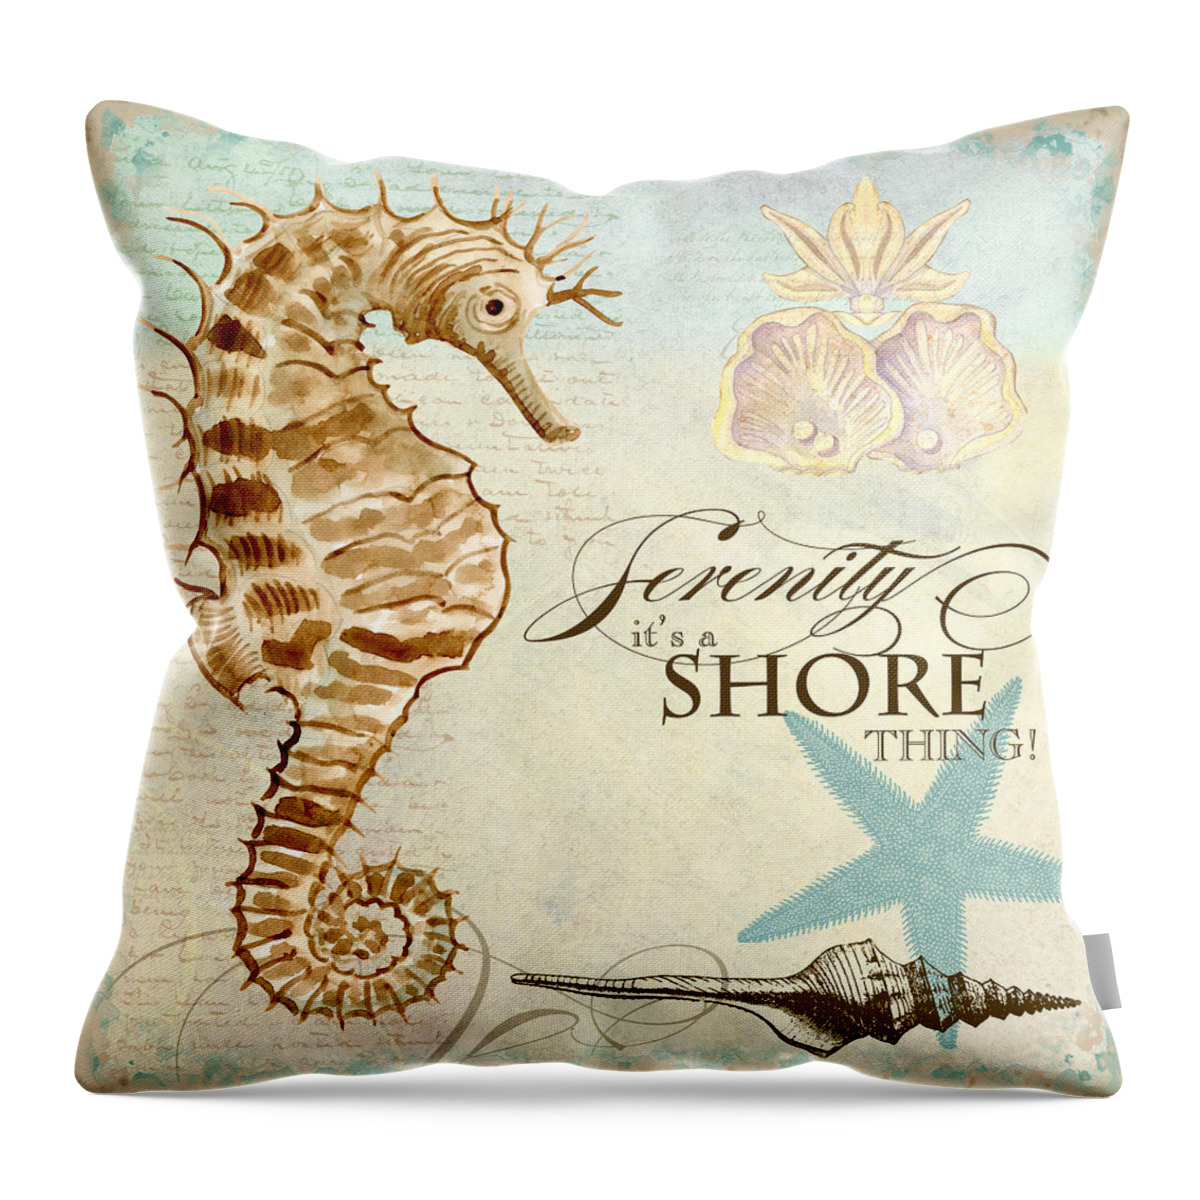 Watercolor Throw Pillow featuring the painting Coastal Waterways - Seahorse Serenity by Audrey Jeanne Roberts